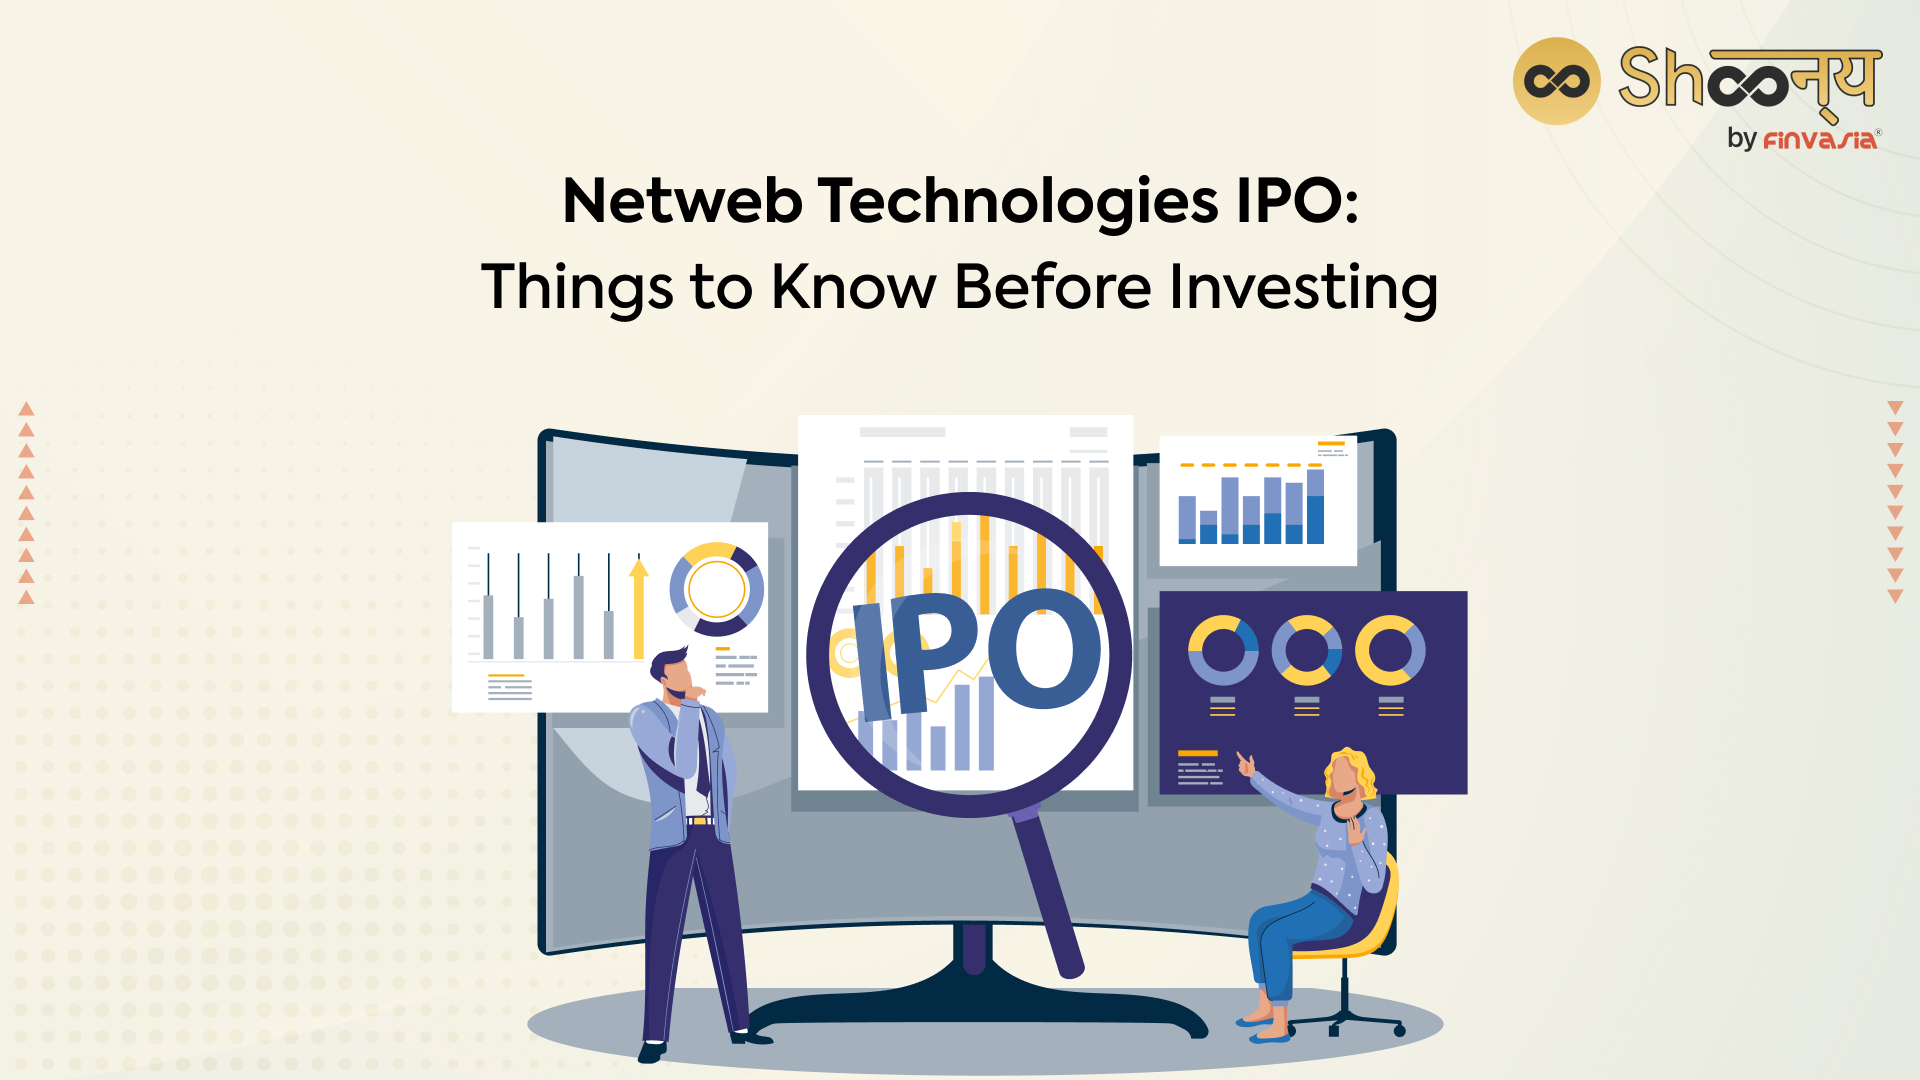 Netweb Technologies IPO: Things to Know Before Investing